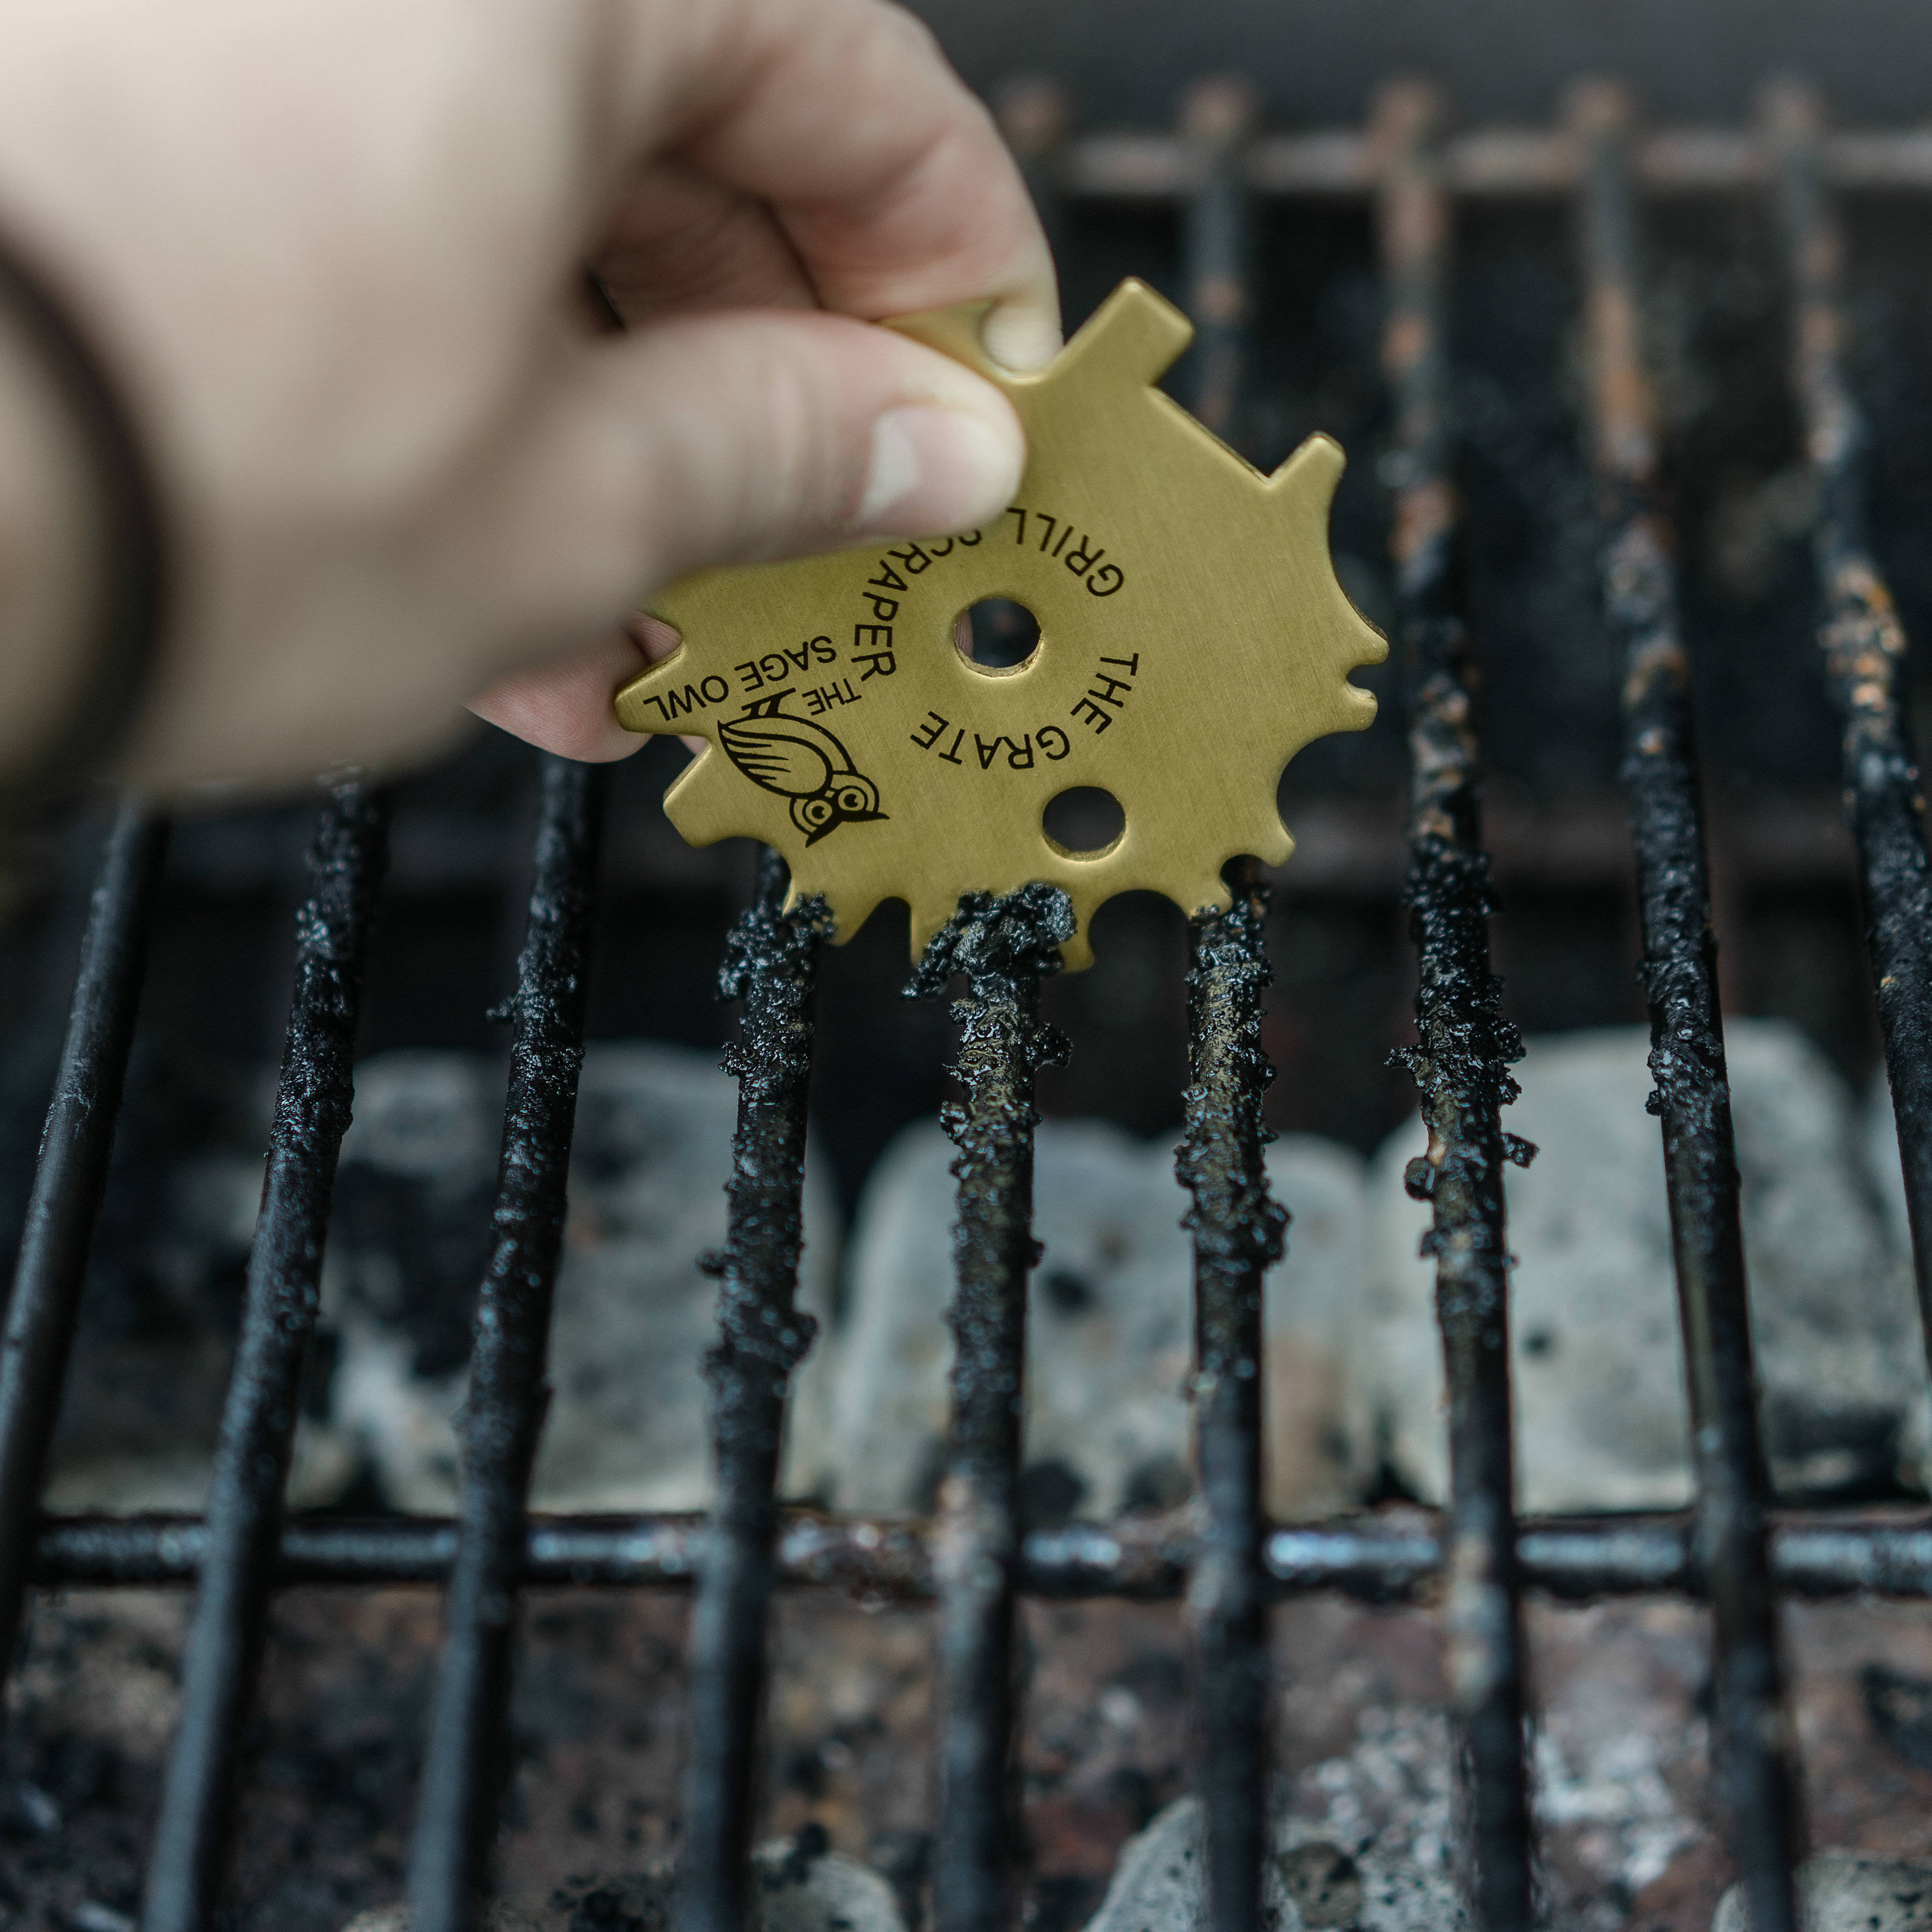 S4490 - The Grate Grill Scraper - Brass Barbeque Cleaner